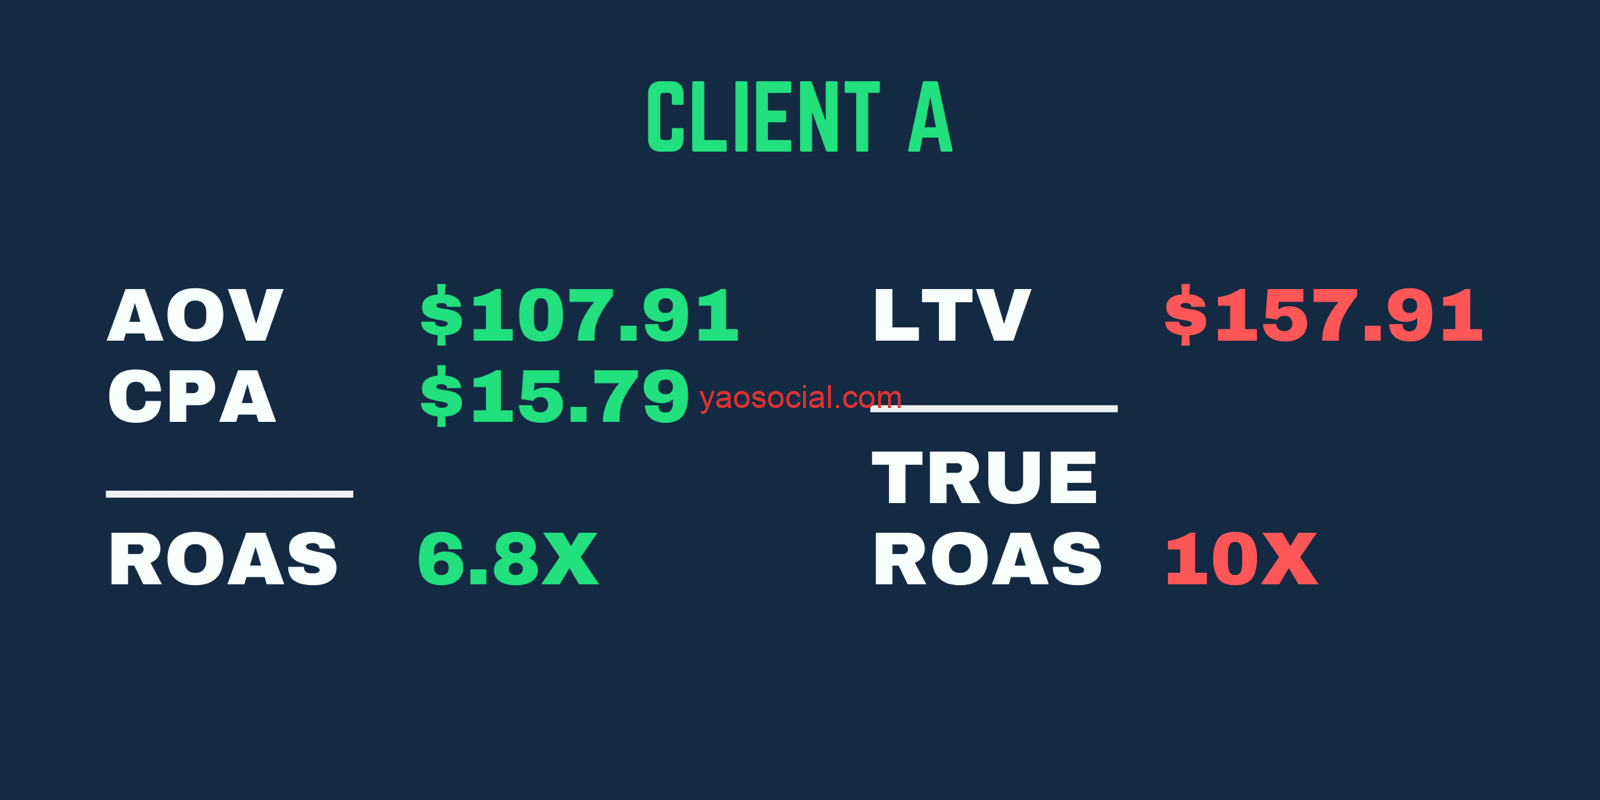 True ROAS example where returns are higher when factoring in the LTV of the customer, not just their first purchase ROAS.